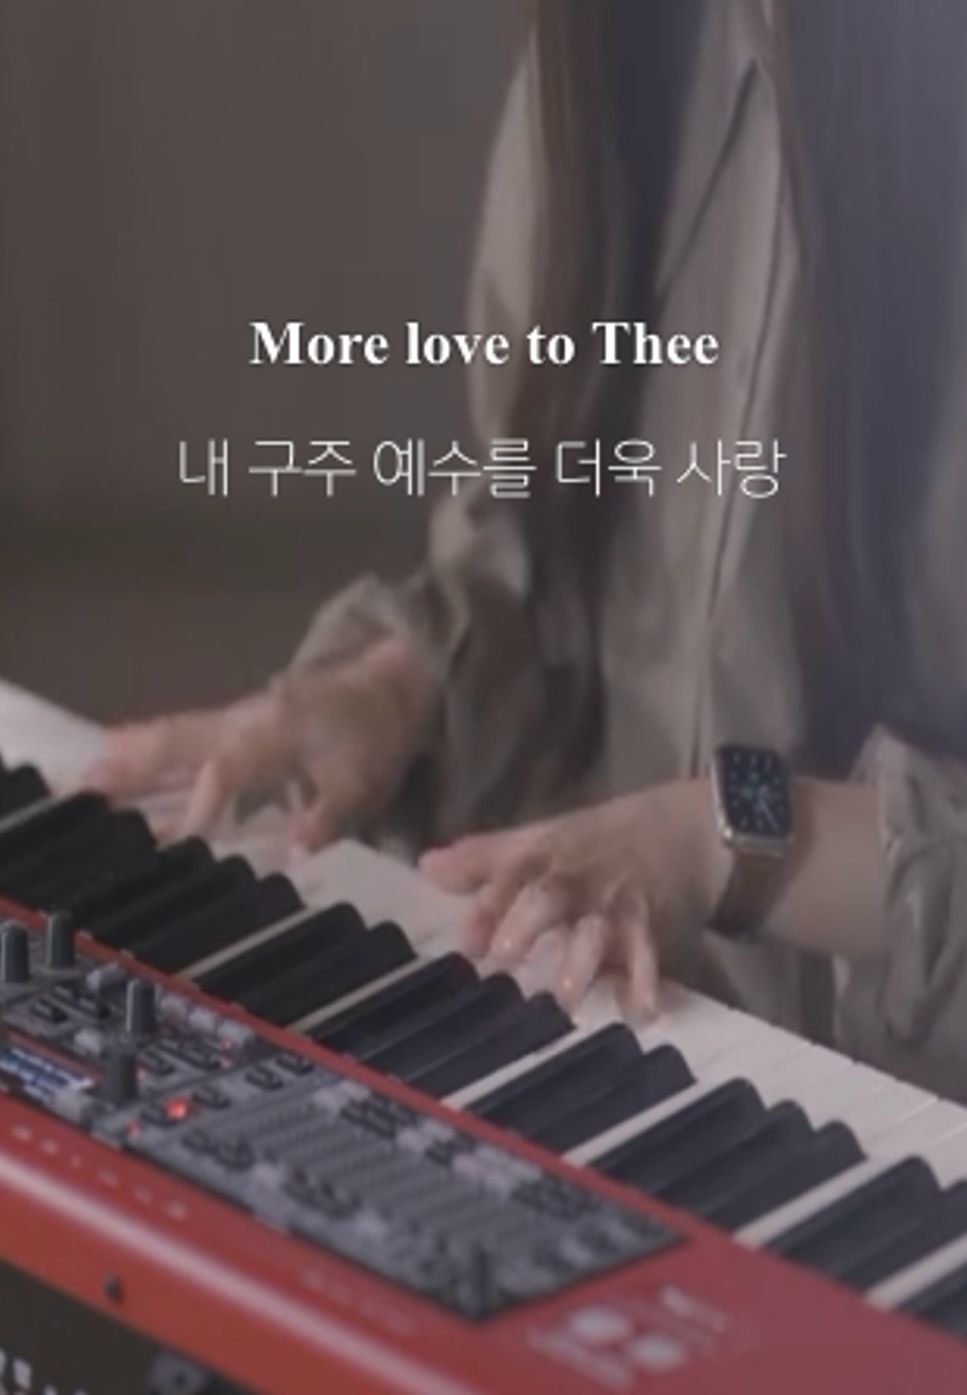 W.H Doane - 내 구주 예수를 더욱 사랑 More love to Thee by Choi Chanmi